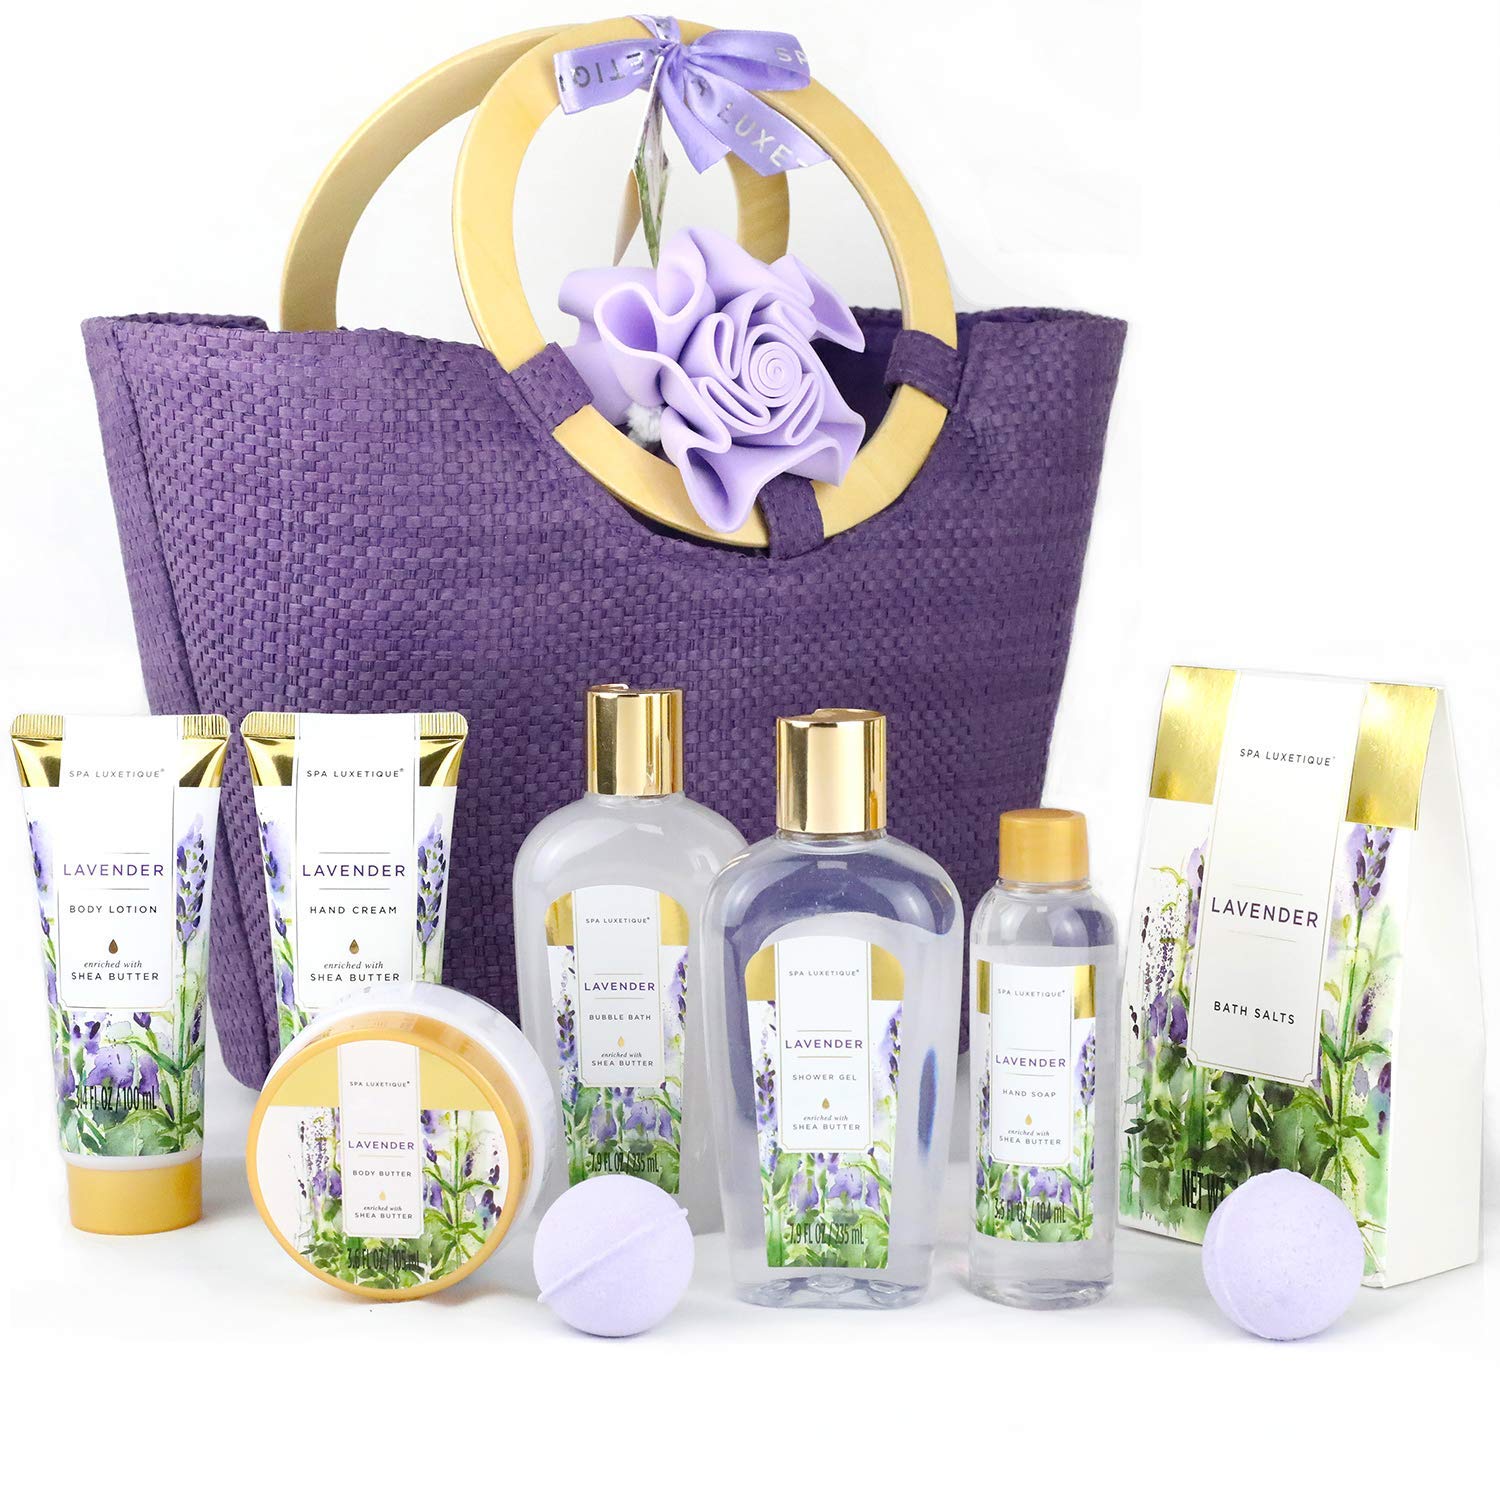 Spa Luxetique Bath Gift Sets for Women Lavender Body Care Baskets - 10 Pcs Relaxing Holiday Birthday Gifts for Her - image 1 of 9